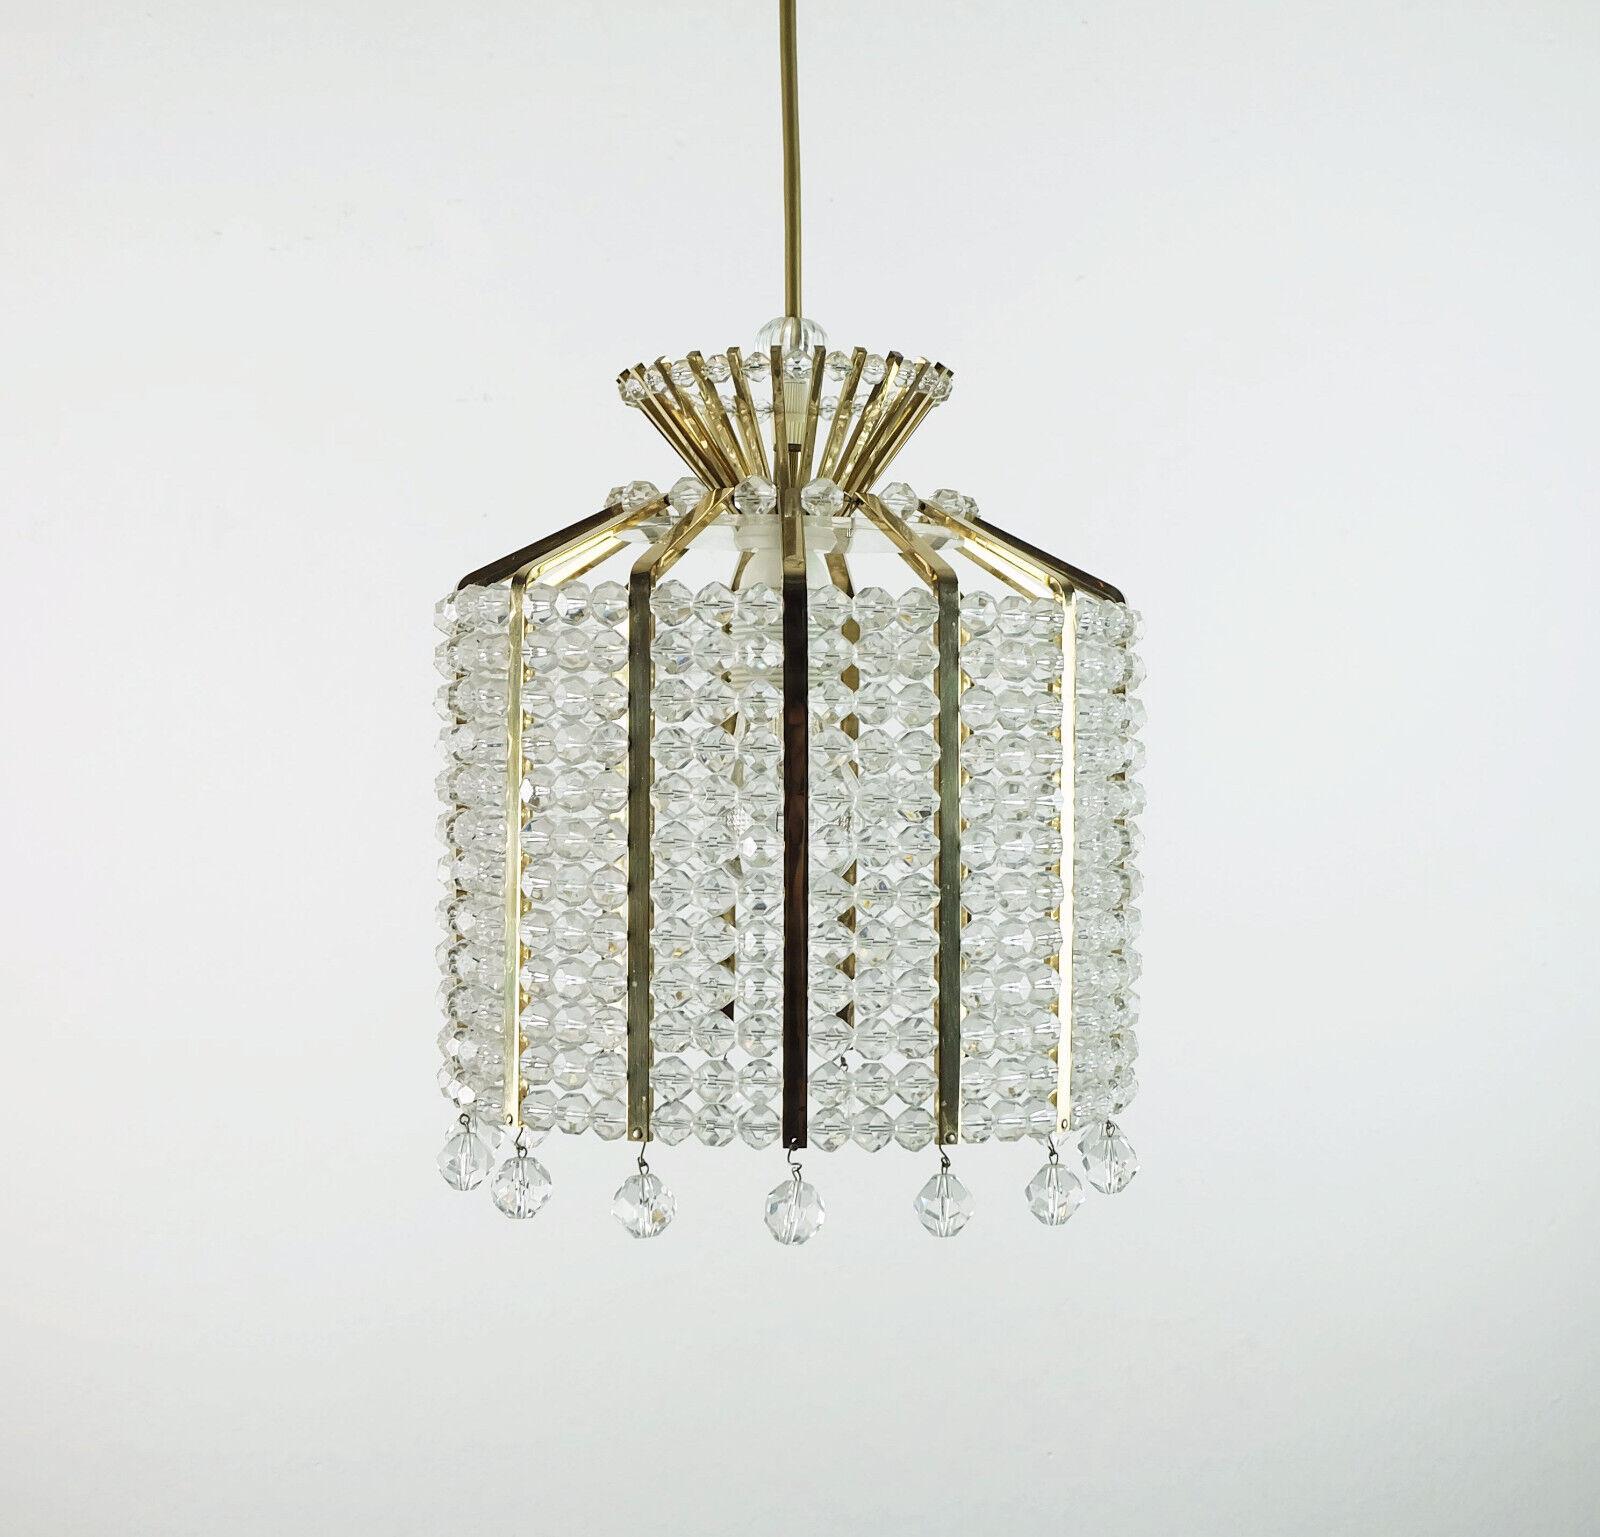 Fantastic and glamorous vintage pendant light, unbranded, but most likely manufactured by Palwa (Palme & Walter) in the 1970s. The shade is made of faceted acrylic pearls, which are lined up between brass rods. Gold colored electric wire, brass